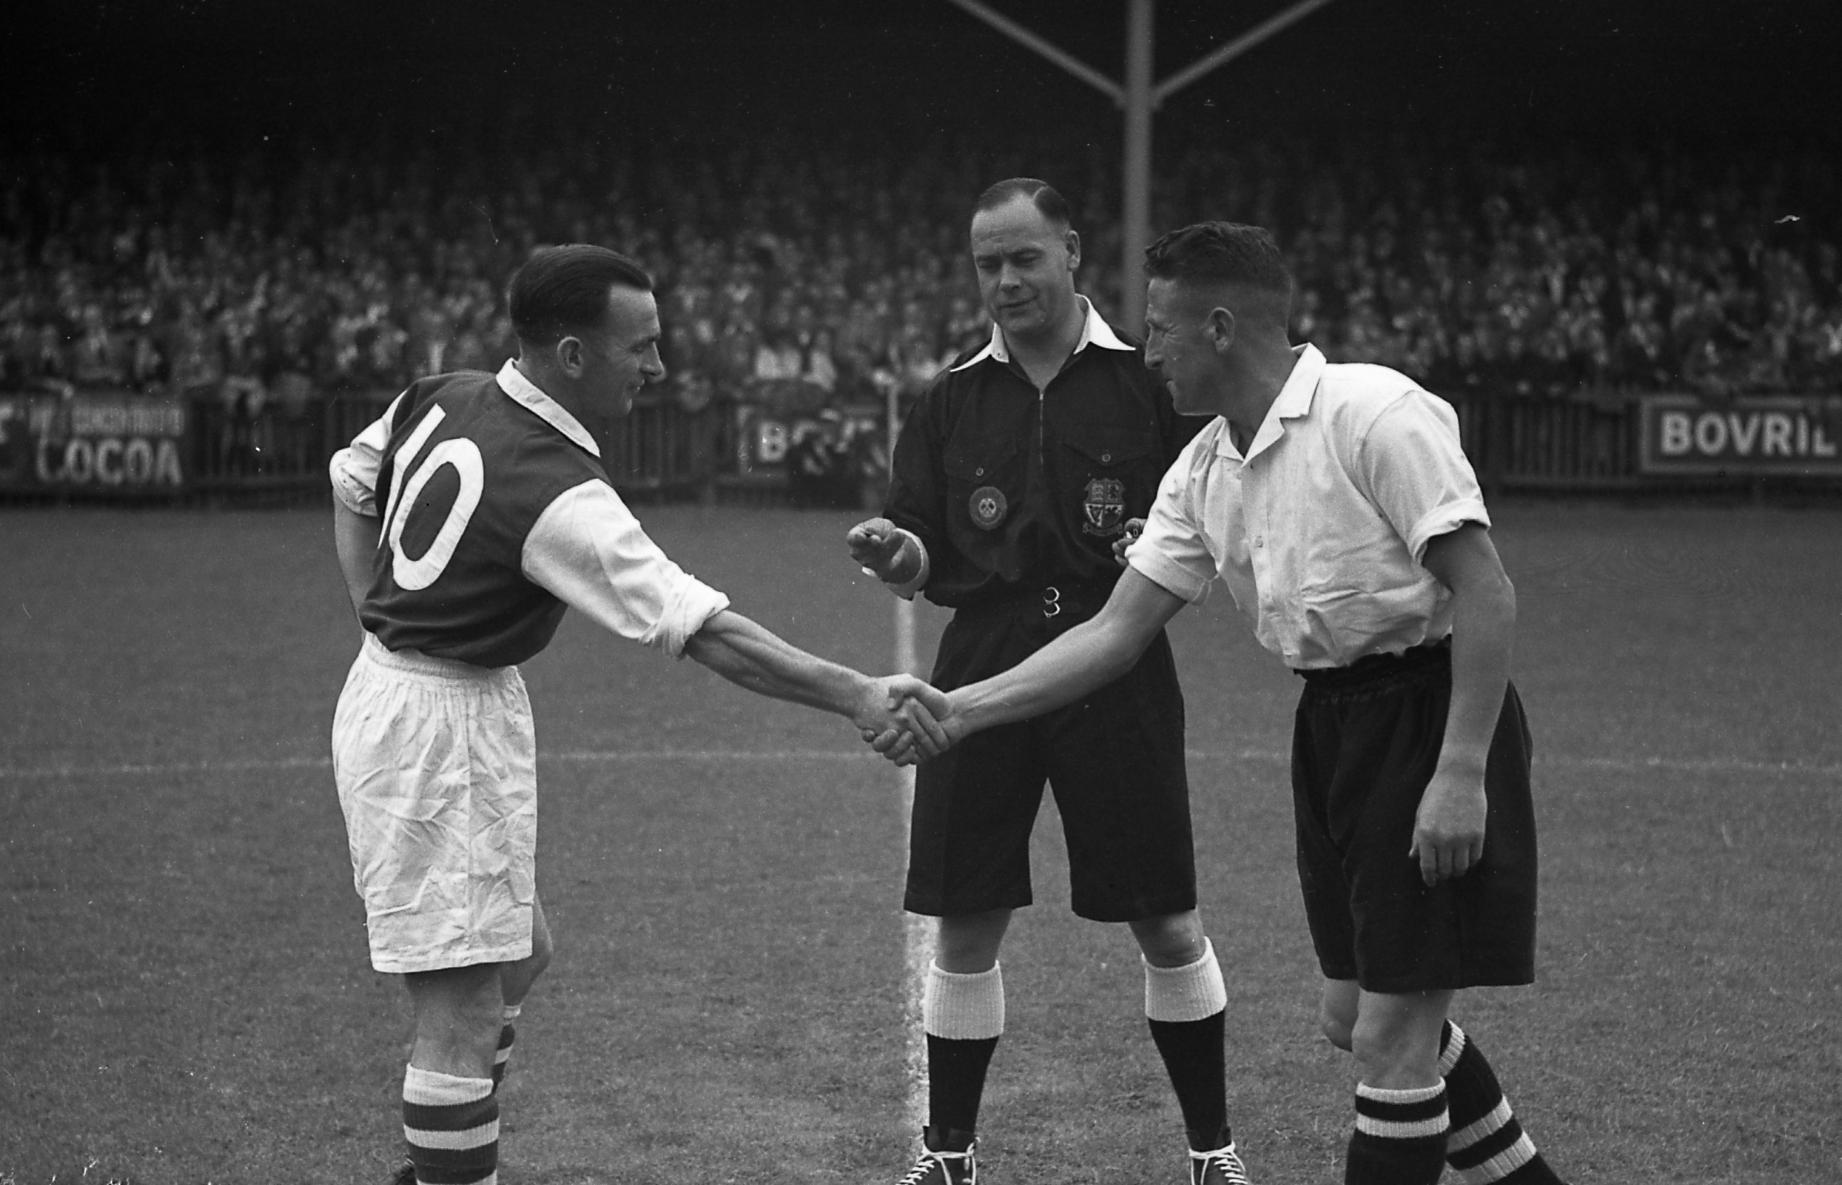 Bud Aherne shakes hands with Rotherham captain Gladstone Guest before the game, under the watchful eye of referee Mr Mann